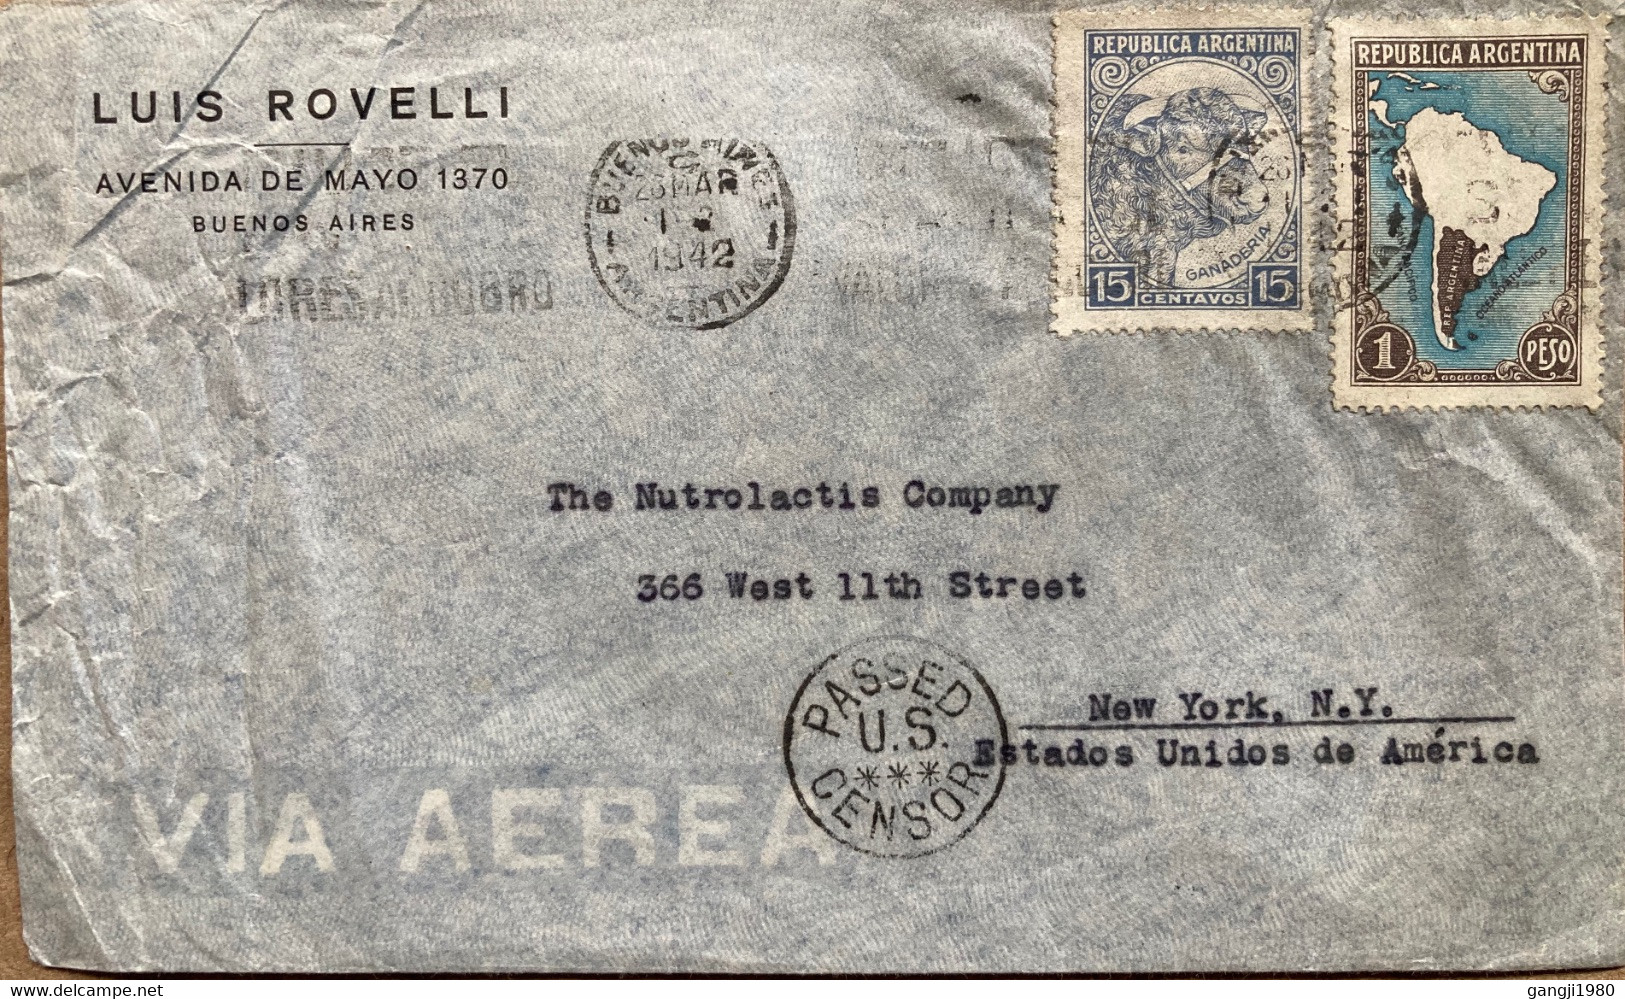 ARGENTINA-1942, WORLD WAR-2, COVER USED TO USA,PASSED US CENSOR CANCEL, PRIVATE COVER, LUIS ROVELLI, MAP, BUFFALO STAMP. - Storia Postale